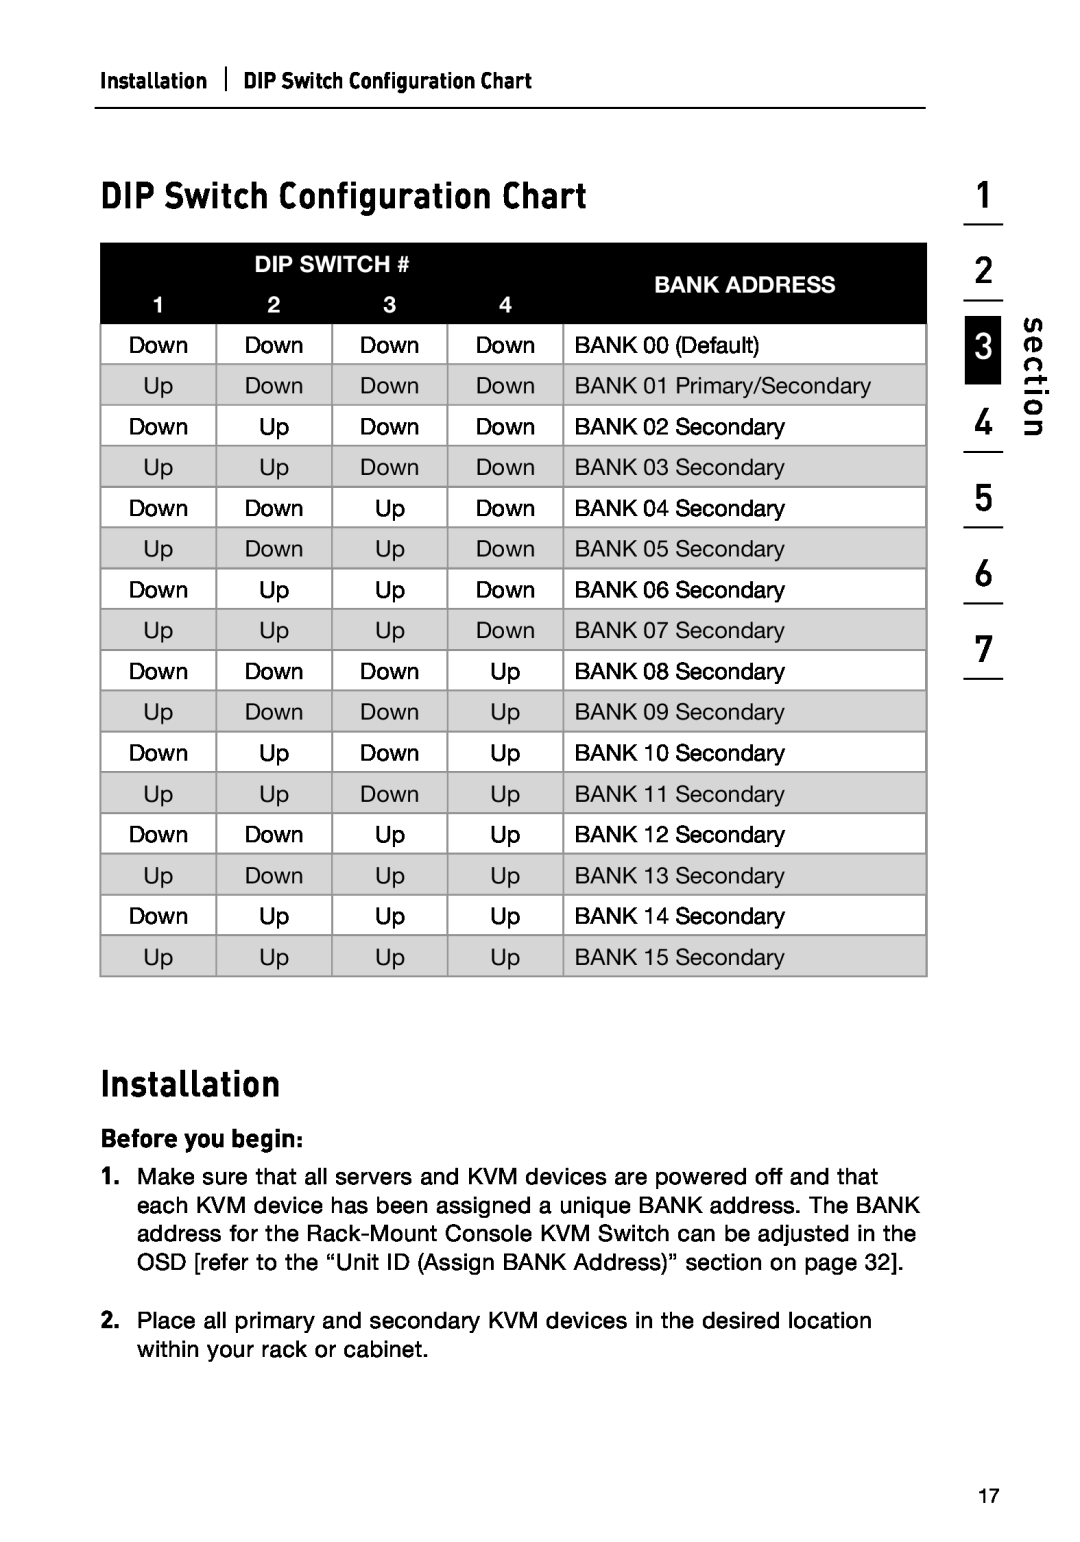 Belkin P74696 manual DIP Switch Configuration Chart, Installation, Before you begin, section, Dip Switch #, Bank Address 